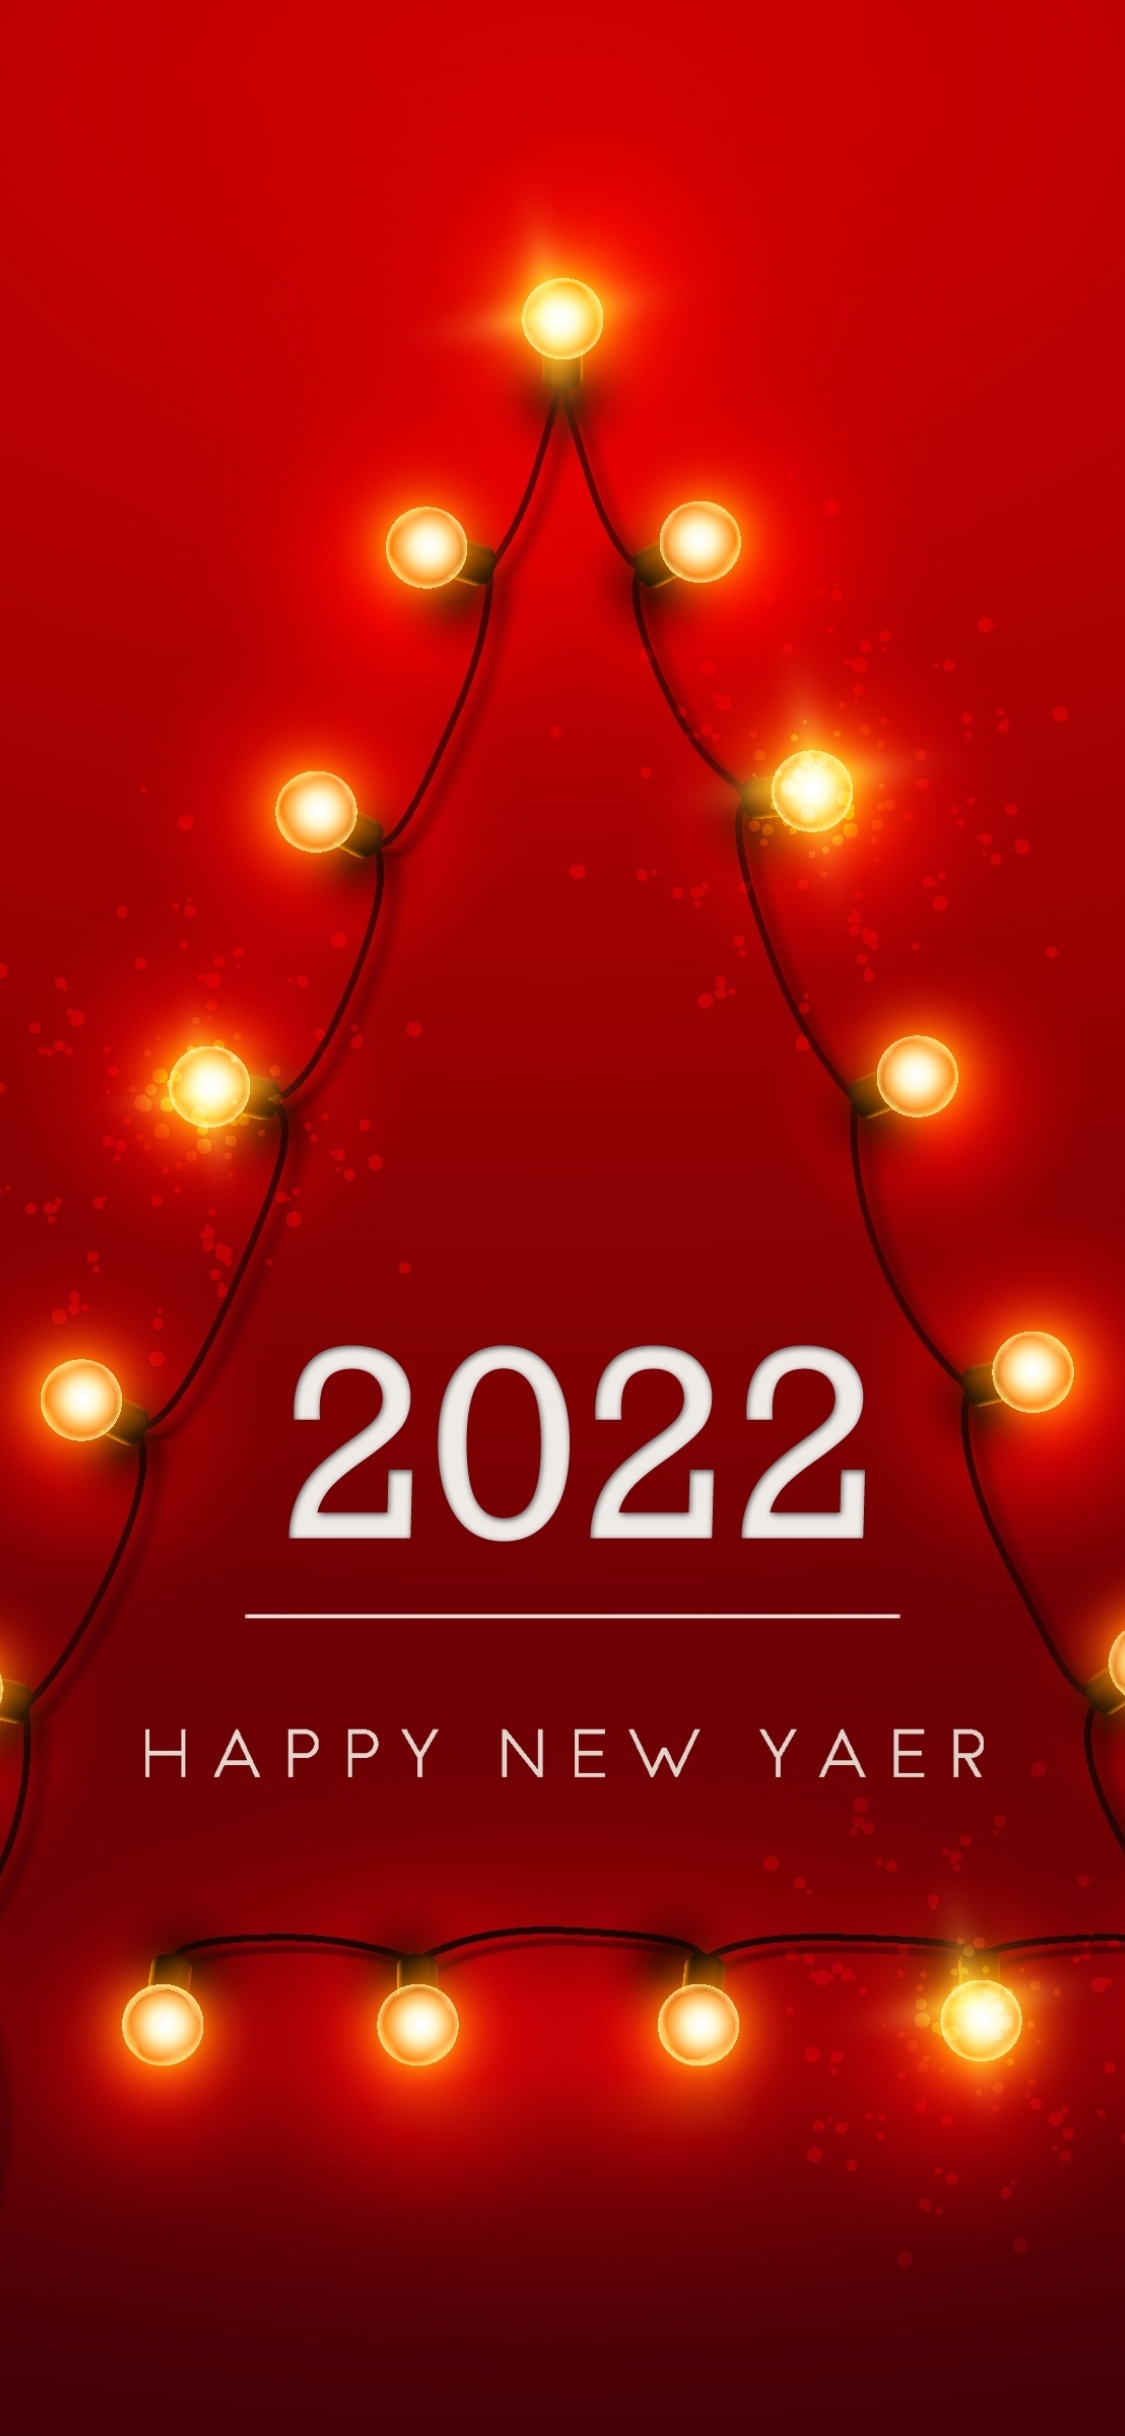 15 Best New Year 2023 wallpapers for iPhone Free HD download  iGeeksBlog